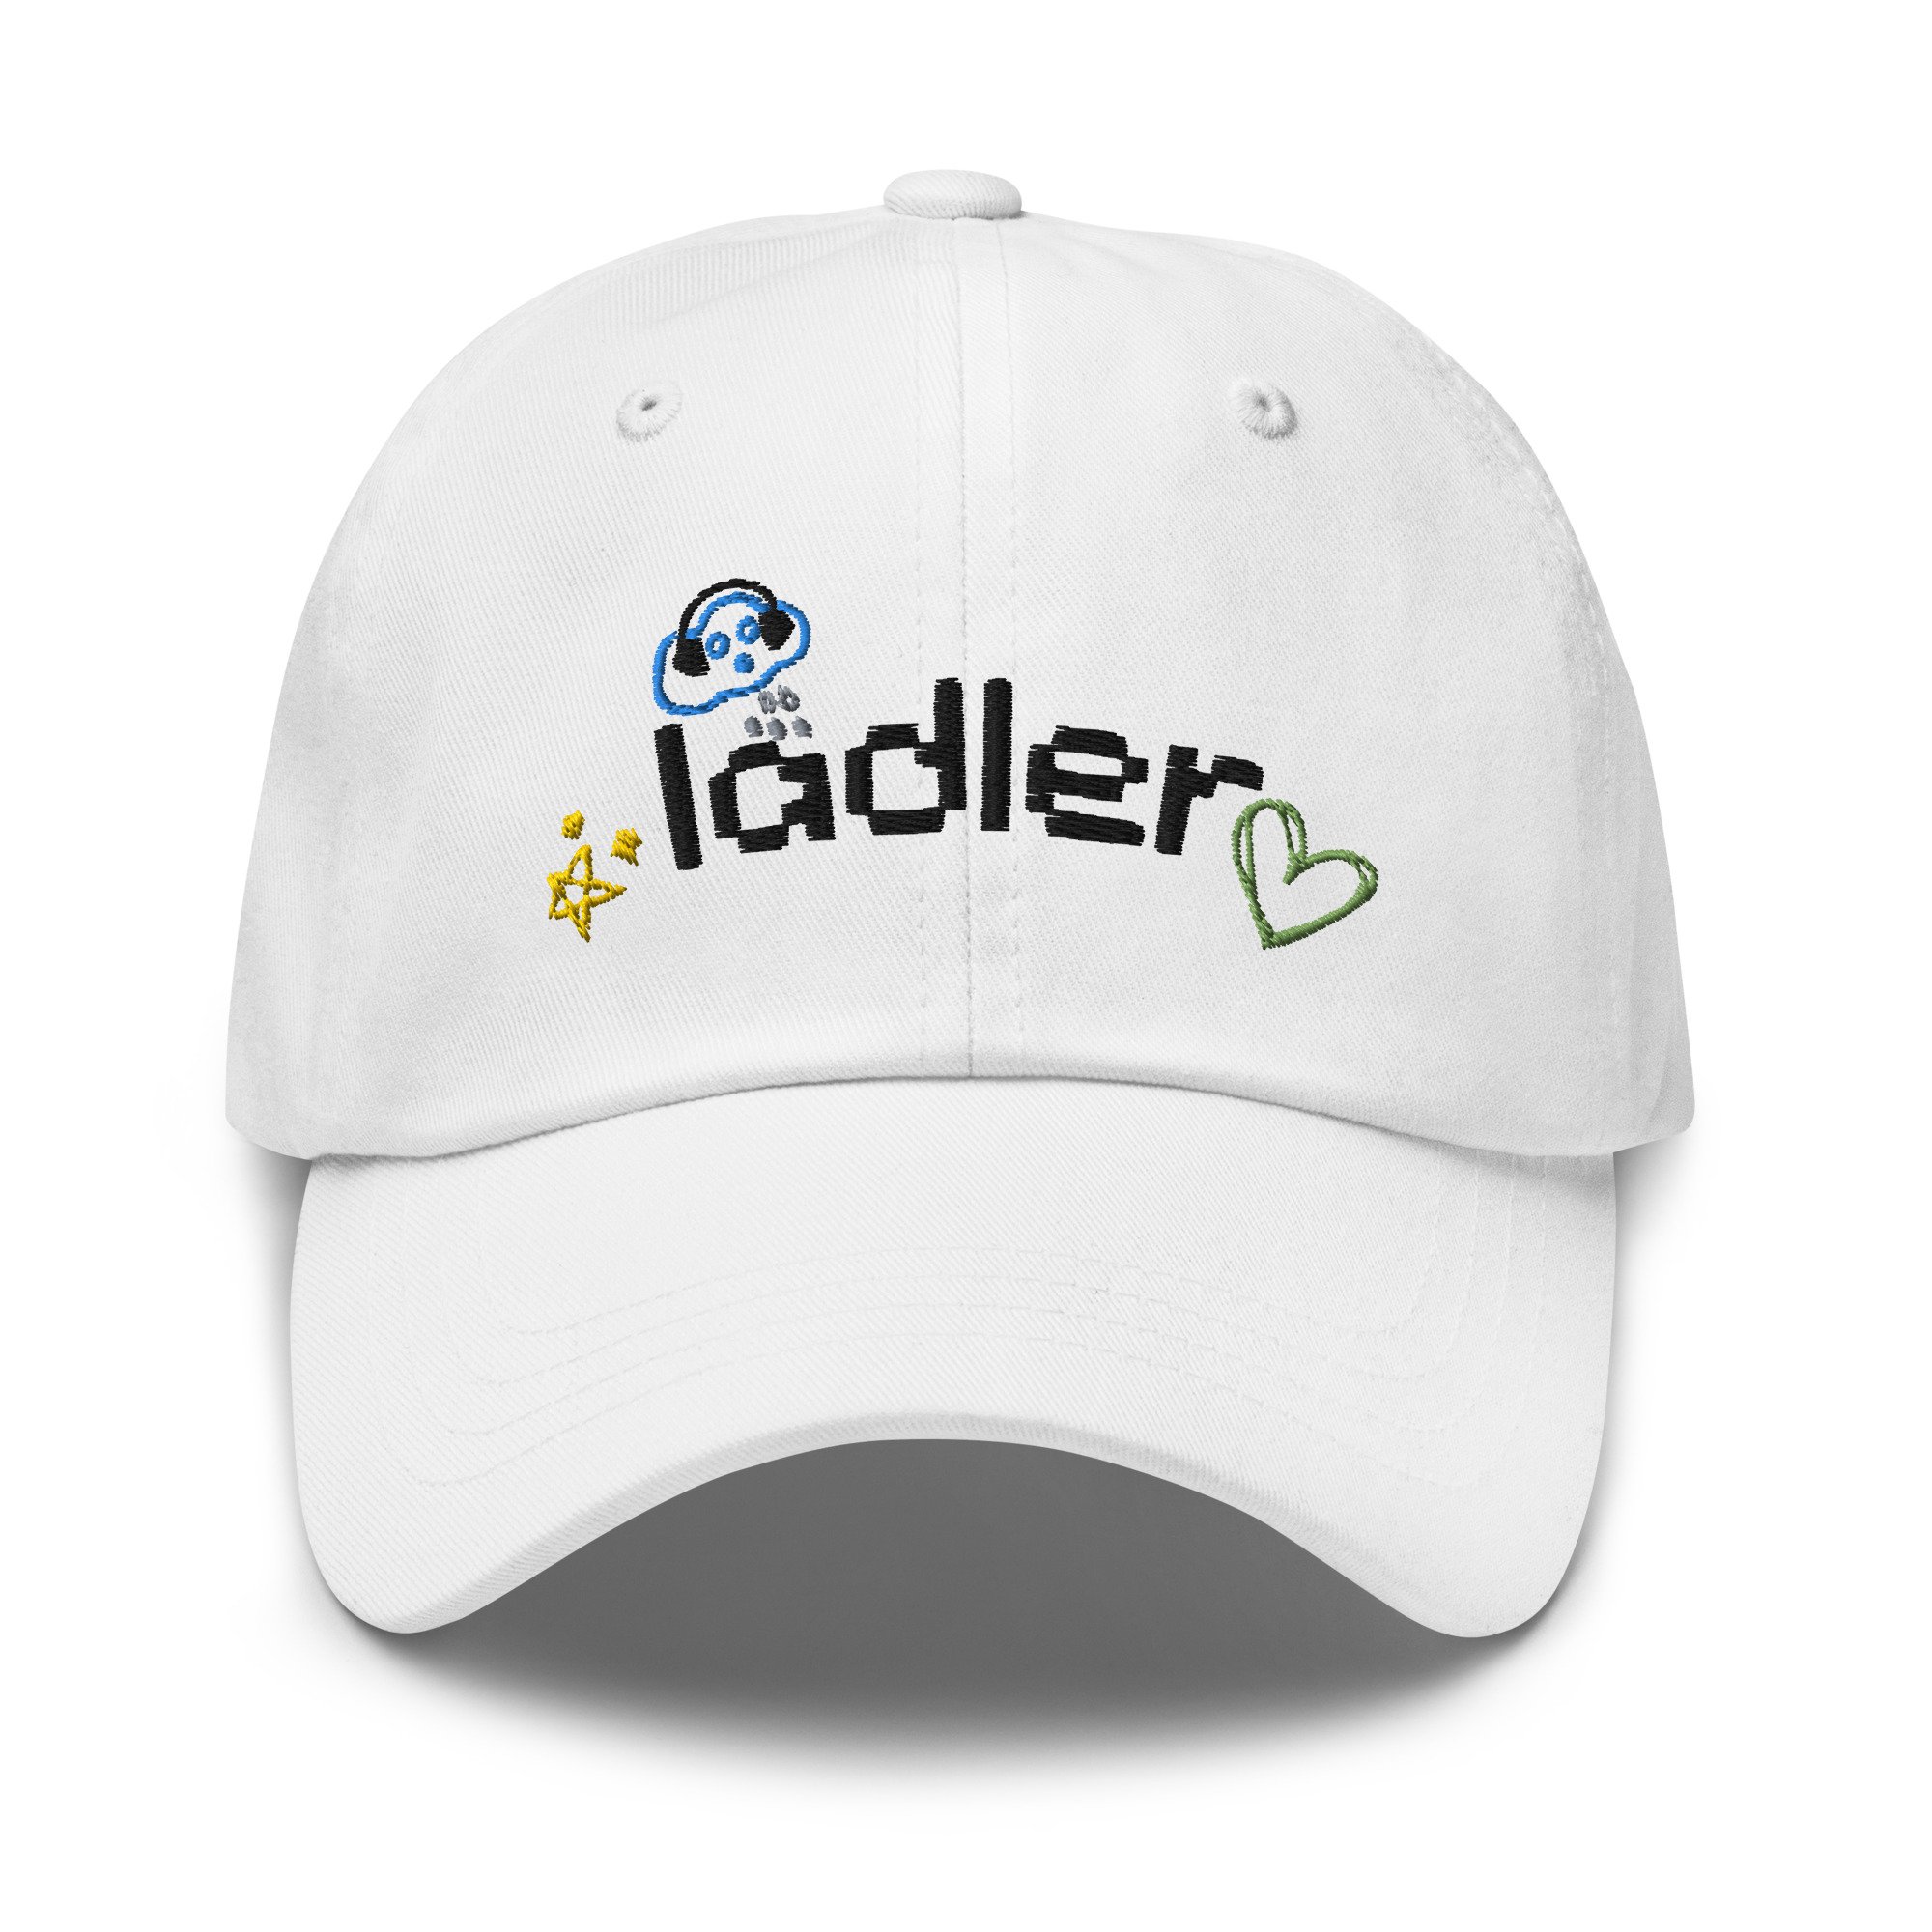 classic-dad-hat-white-front-63b06a9fc2d41.jpg